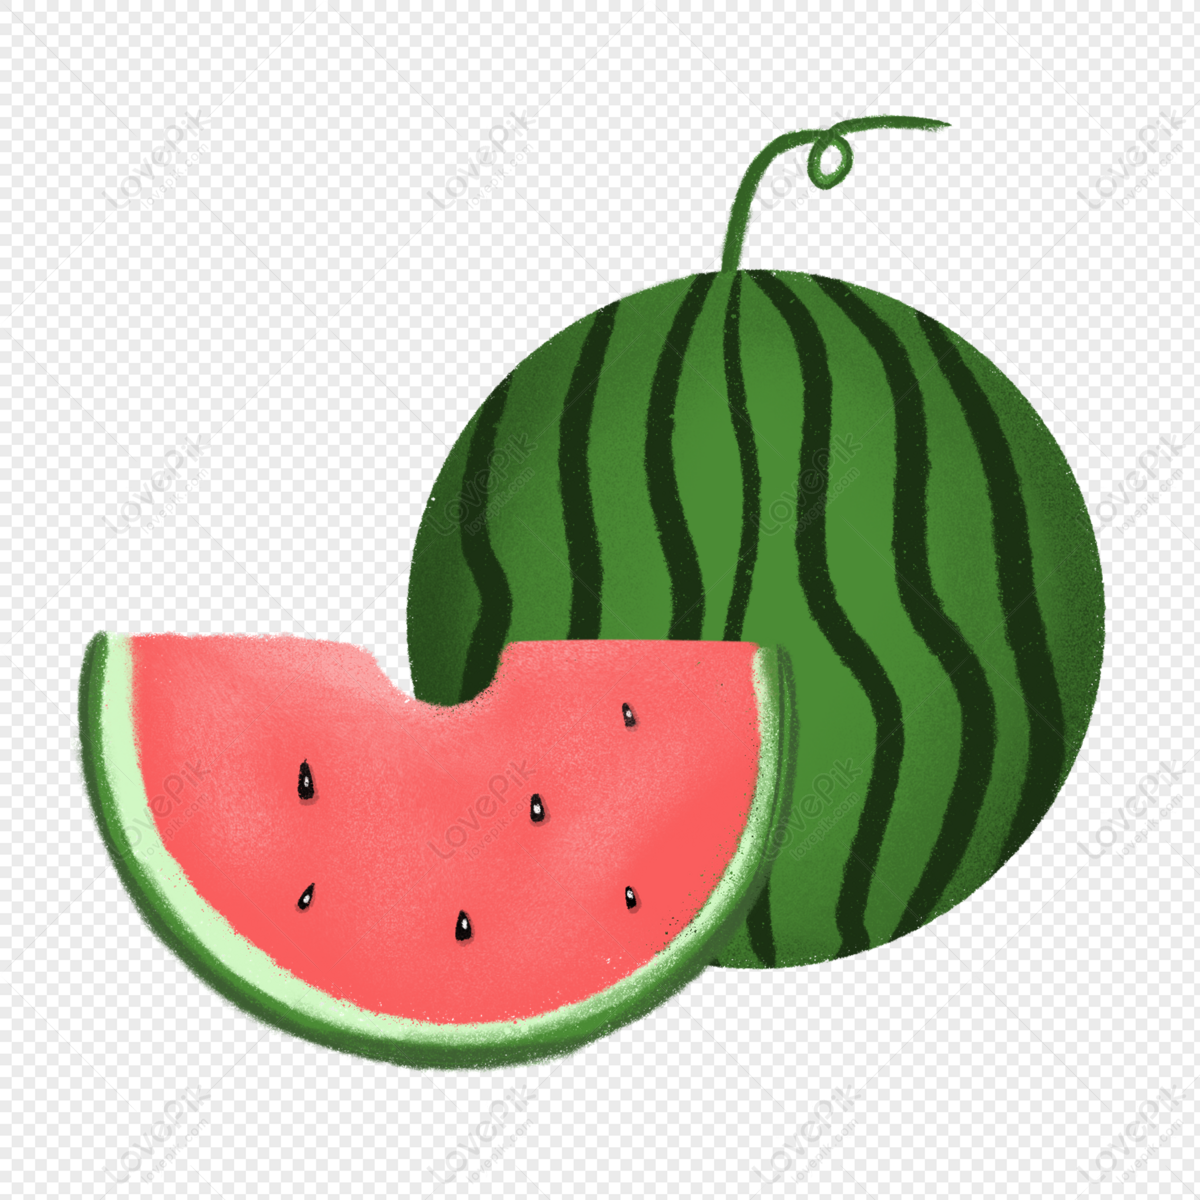 Cartoon Watermelon PNG Transparent Background And Clipart Image For Free  Download - Lovepik | 401507950